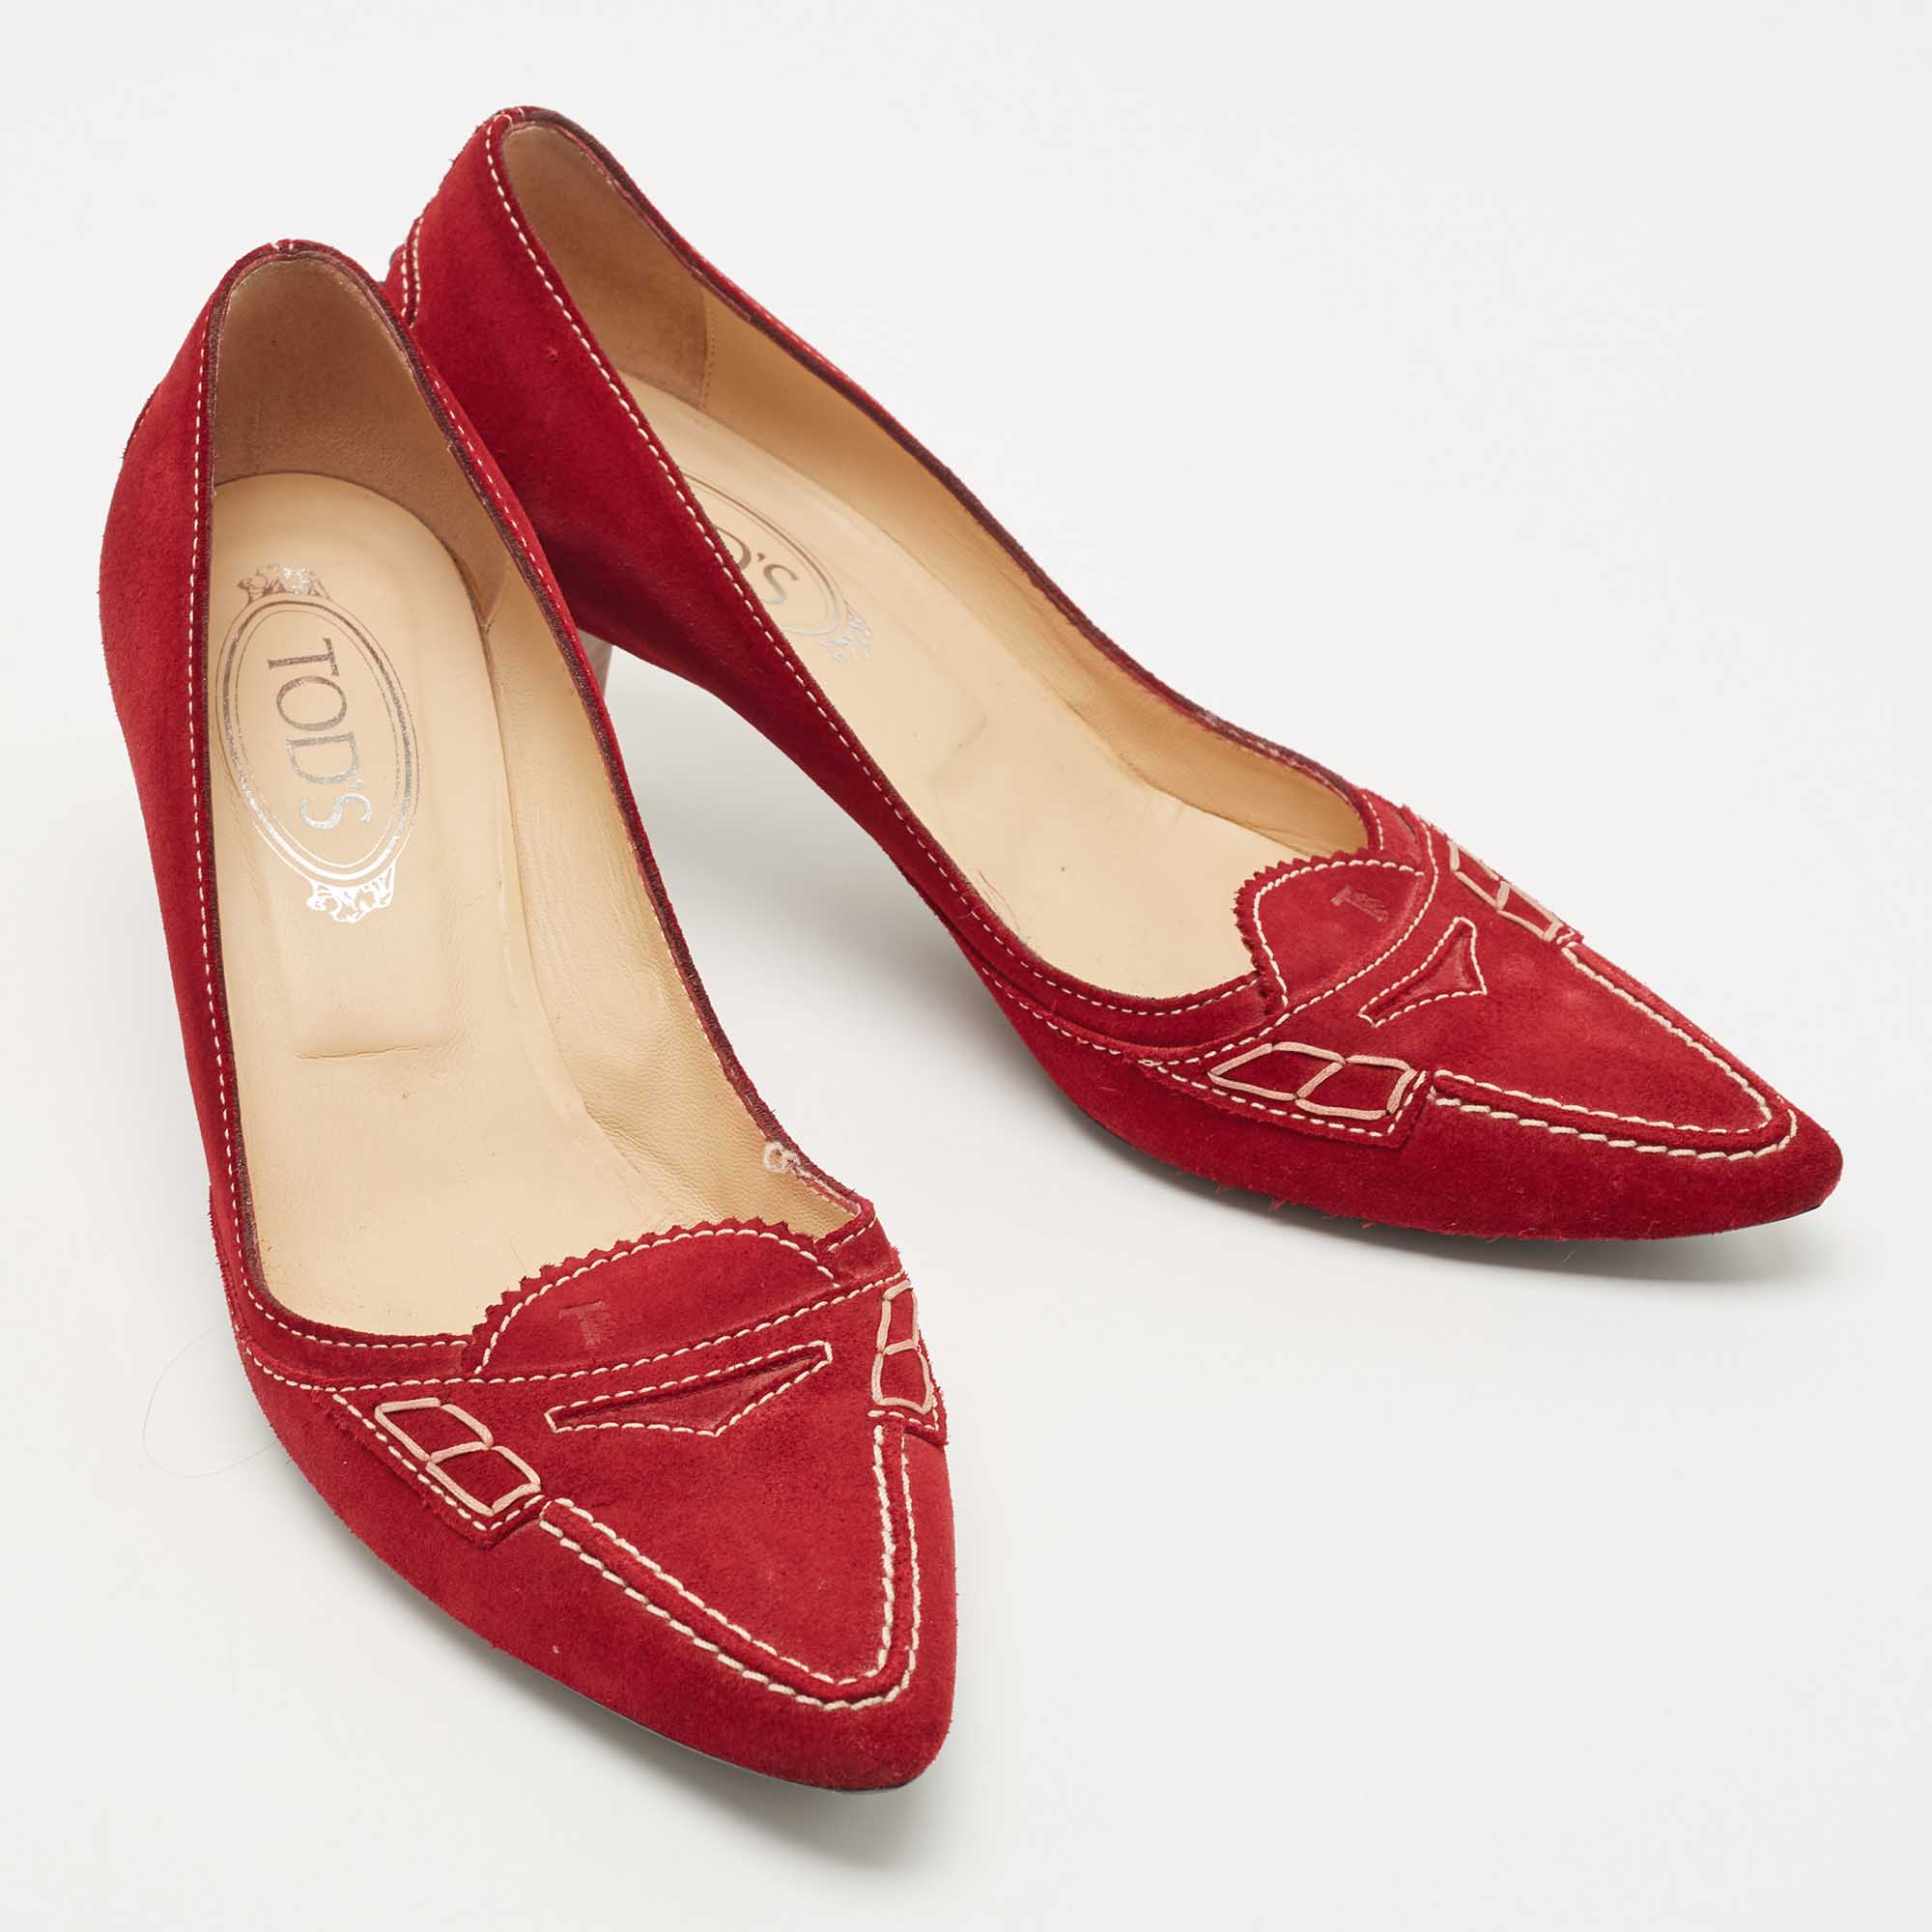 Tod's Dark Red Suede Loafer Pumps Size 39